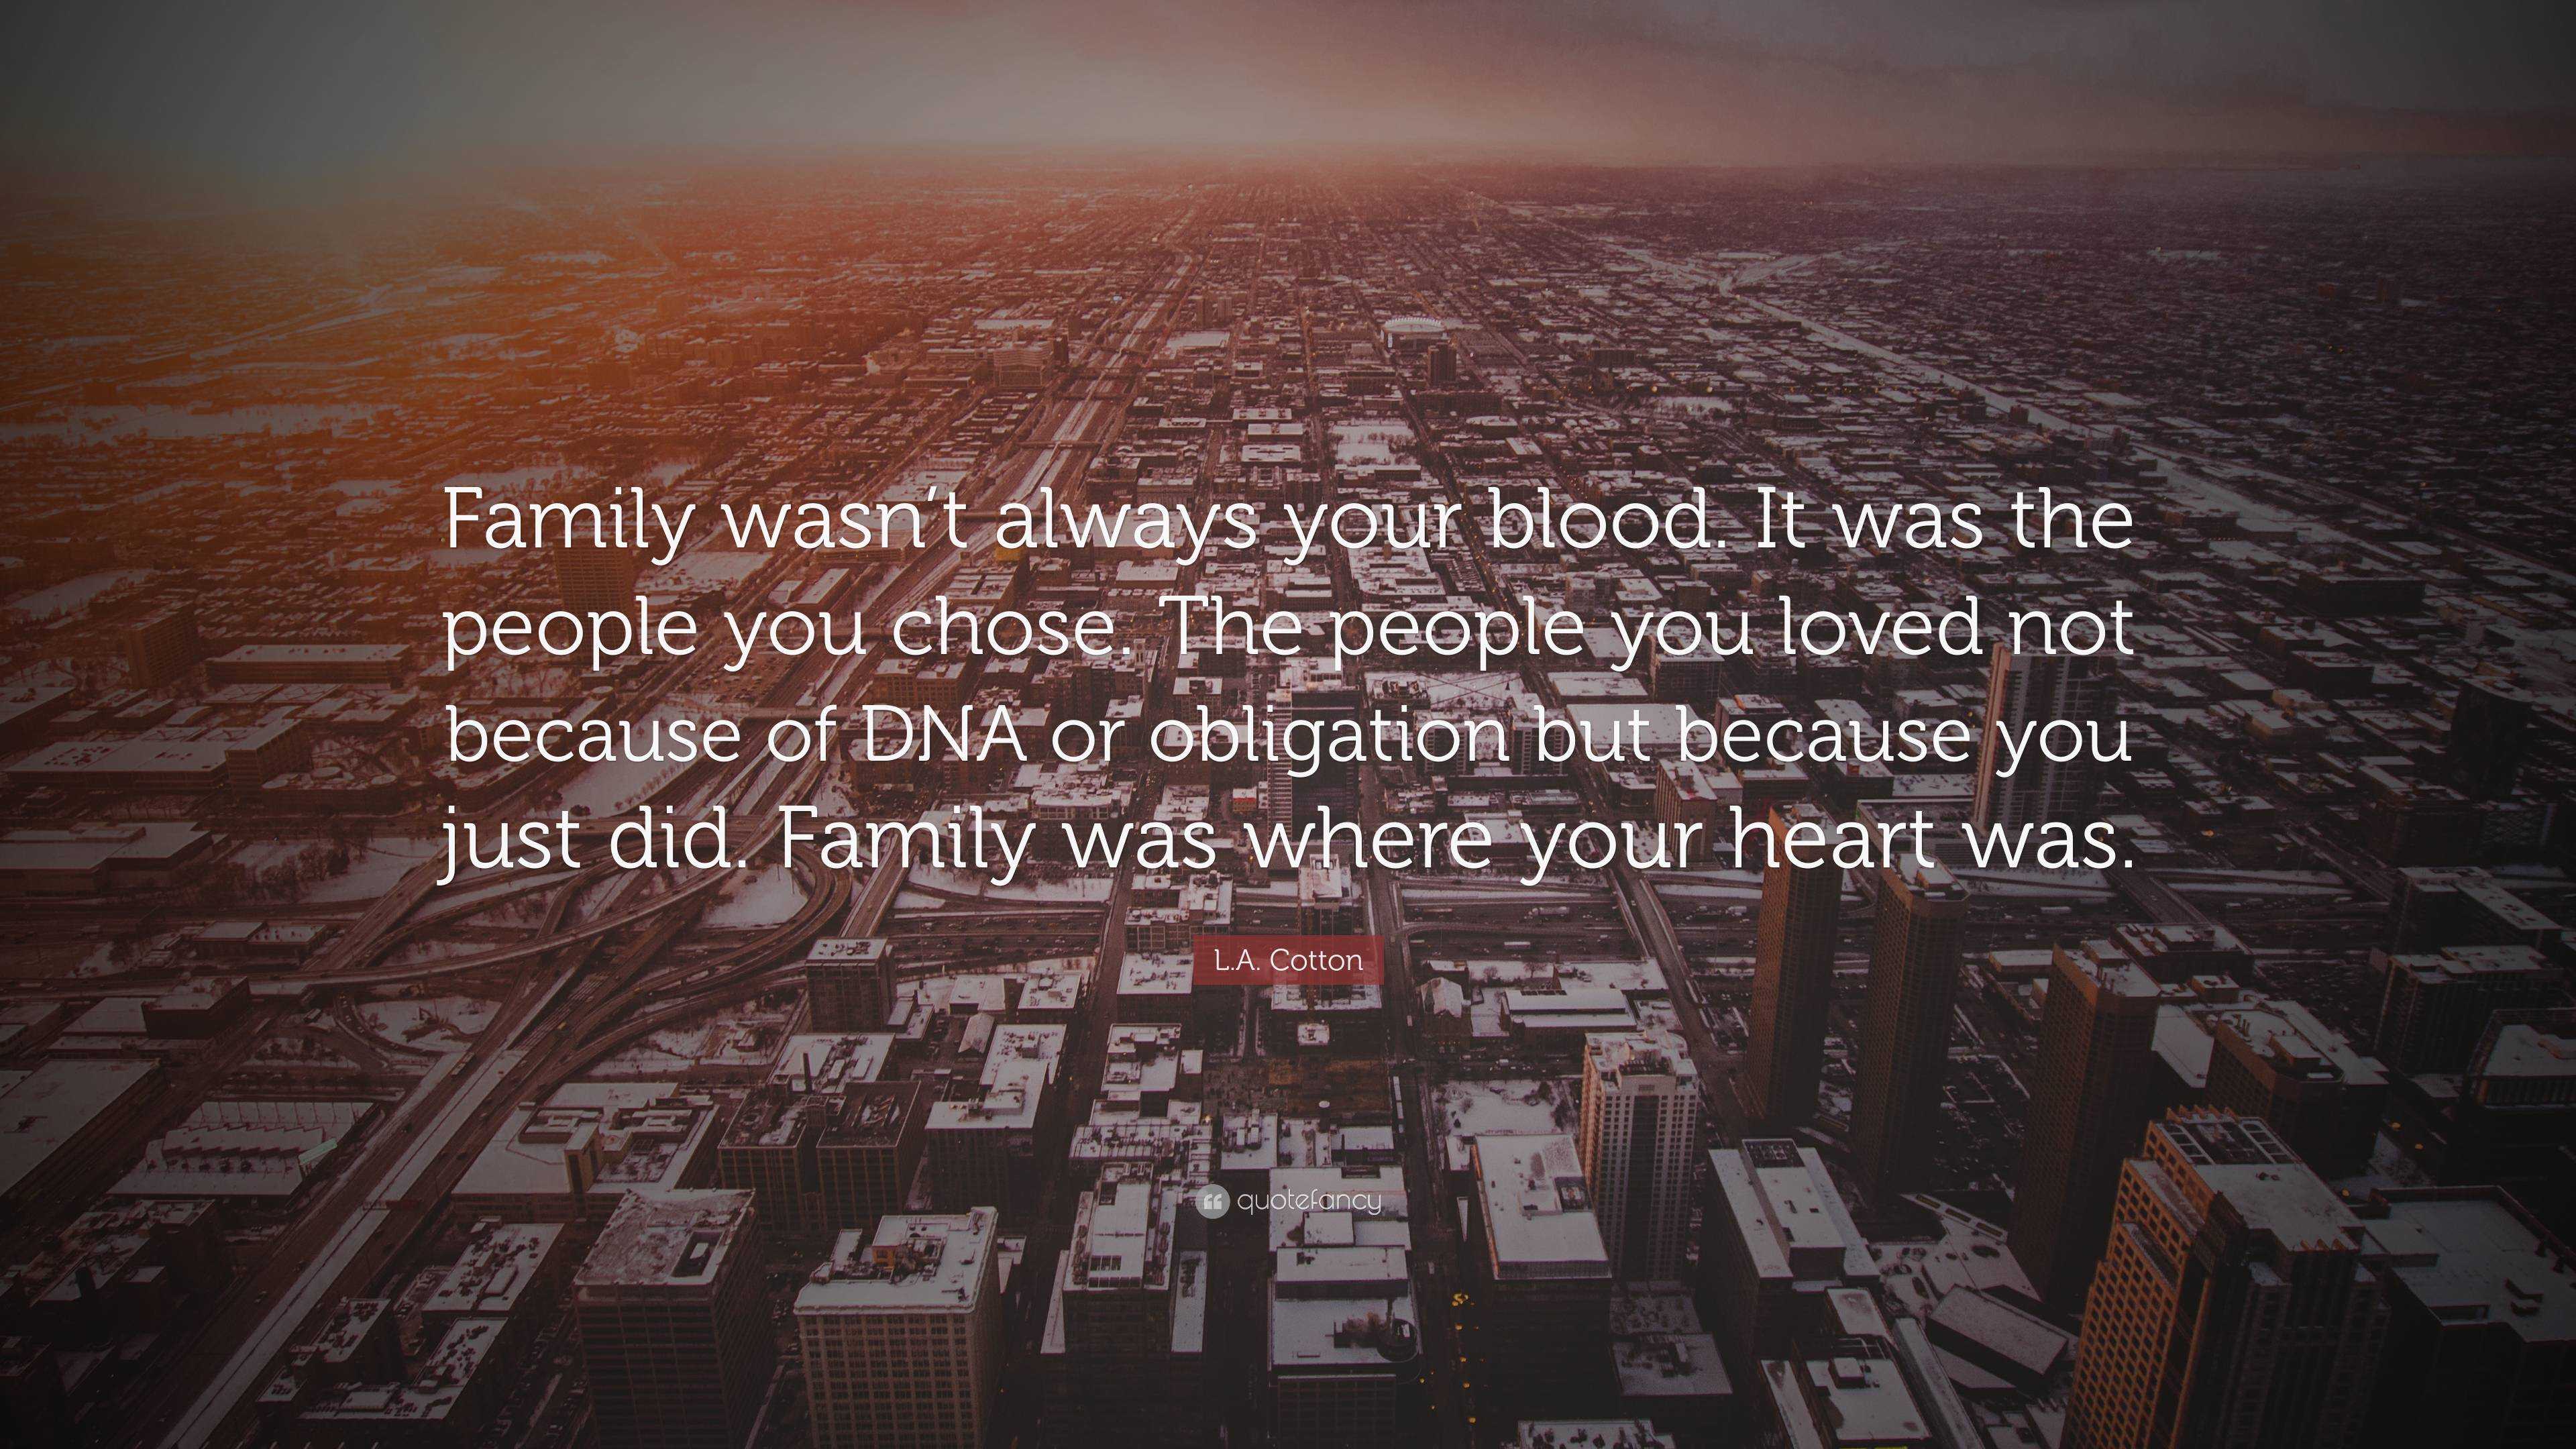 L.A. Cotton Quote: “Blood makes you related, but it's loyalty that makes  you family.”